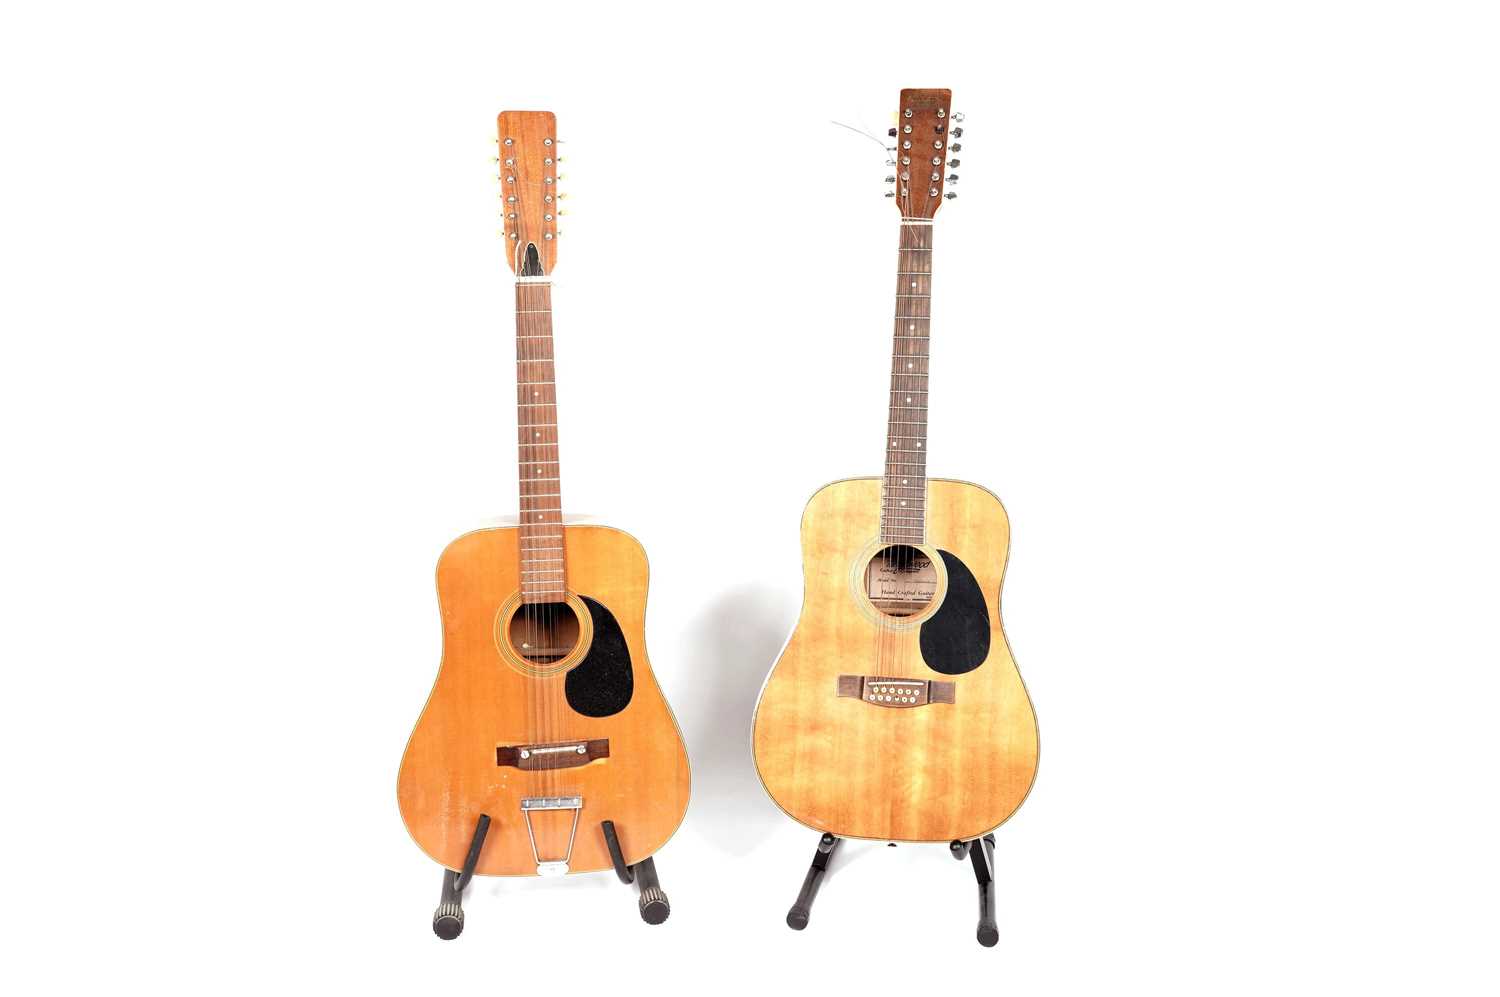 Two 12-string acoustic guitars